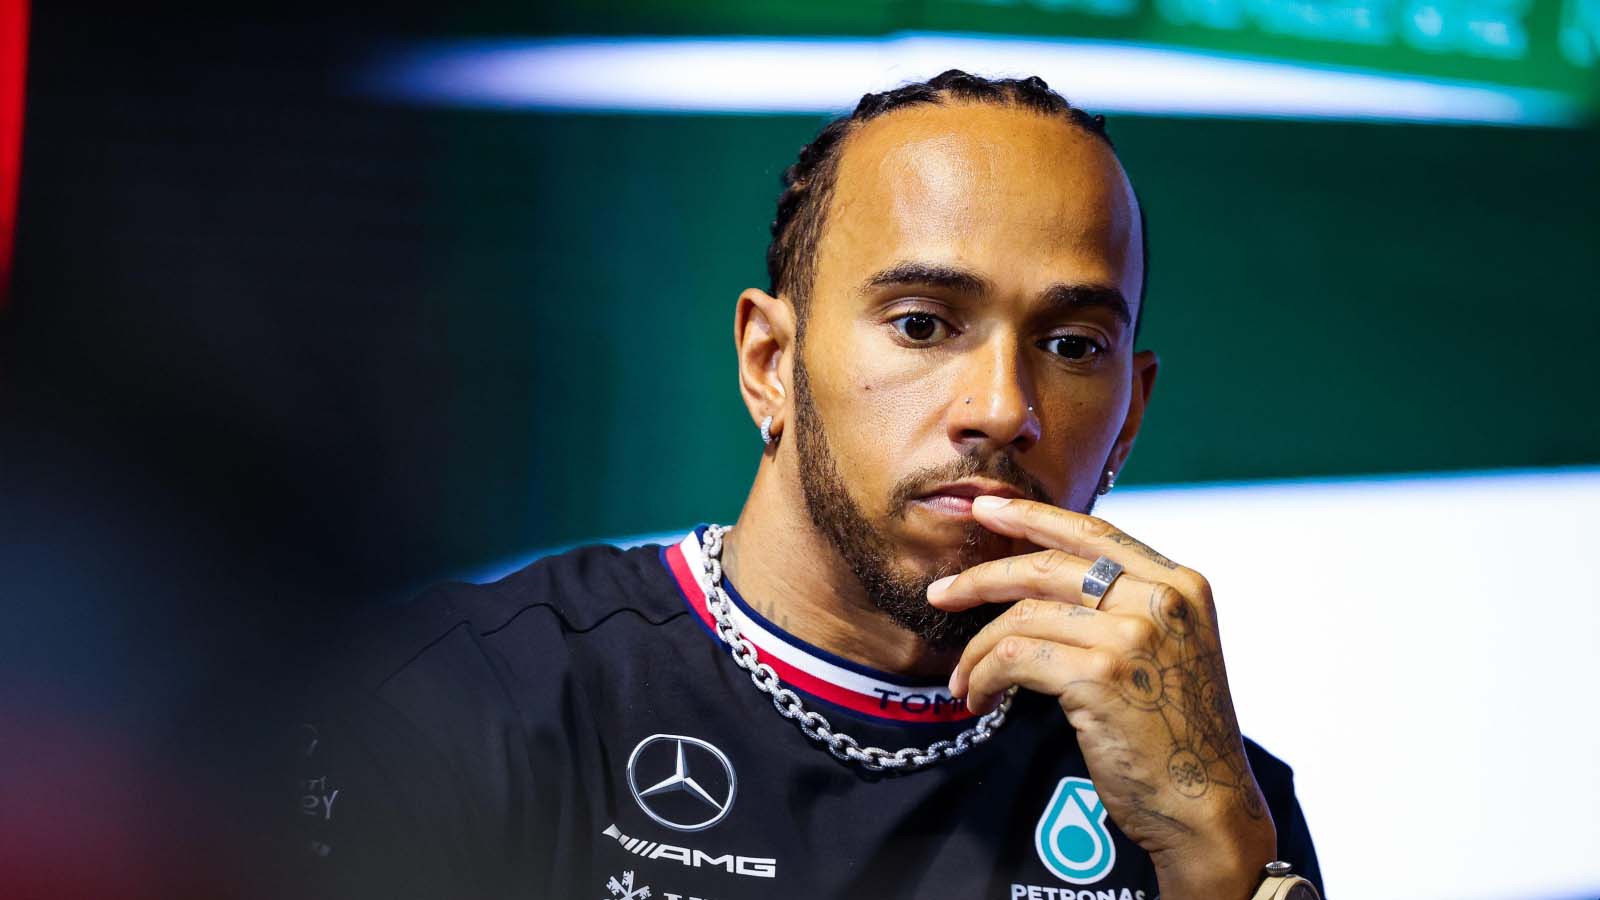 Lewis Hamilton sits in the press conference. Jeddah March 2023.